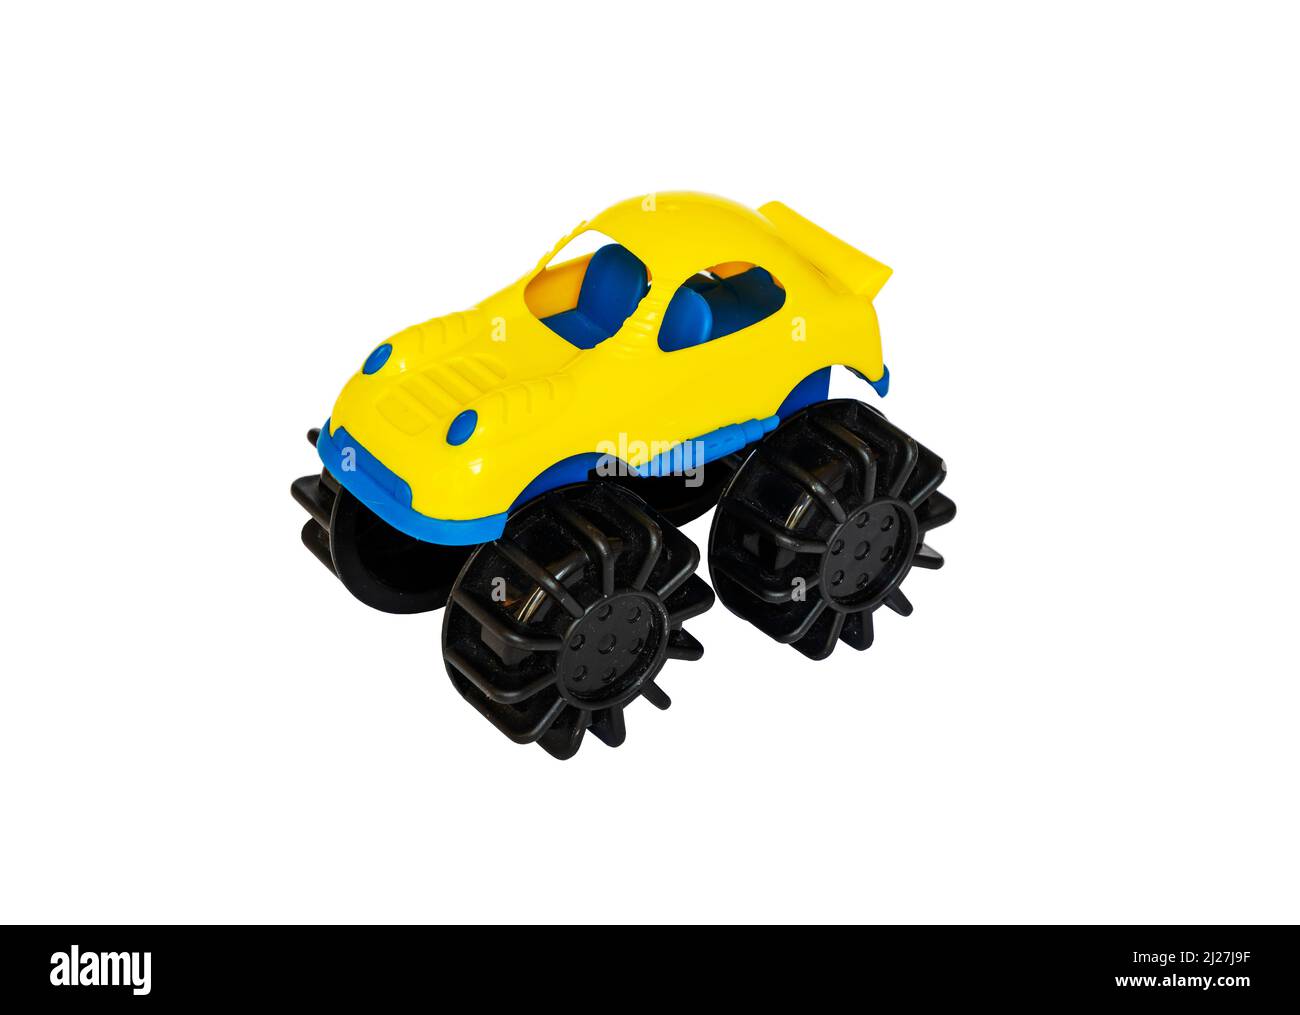 Children's yellow plastic toy car on a white background Stock Photo